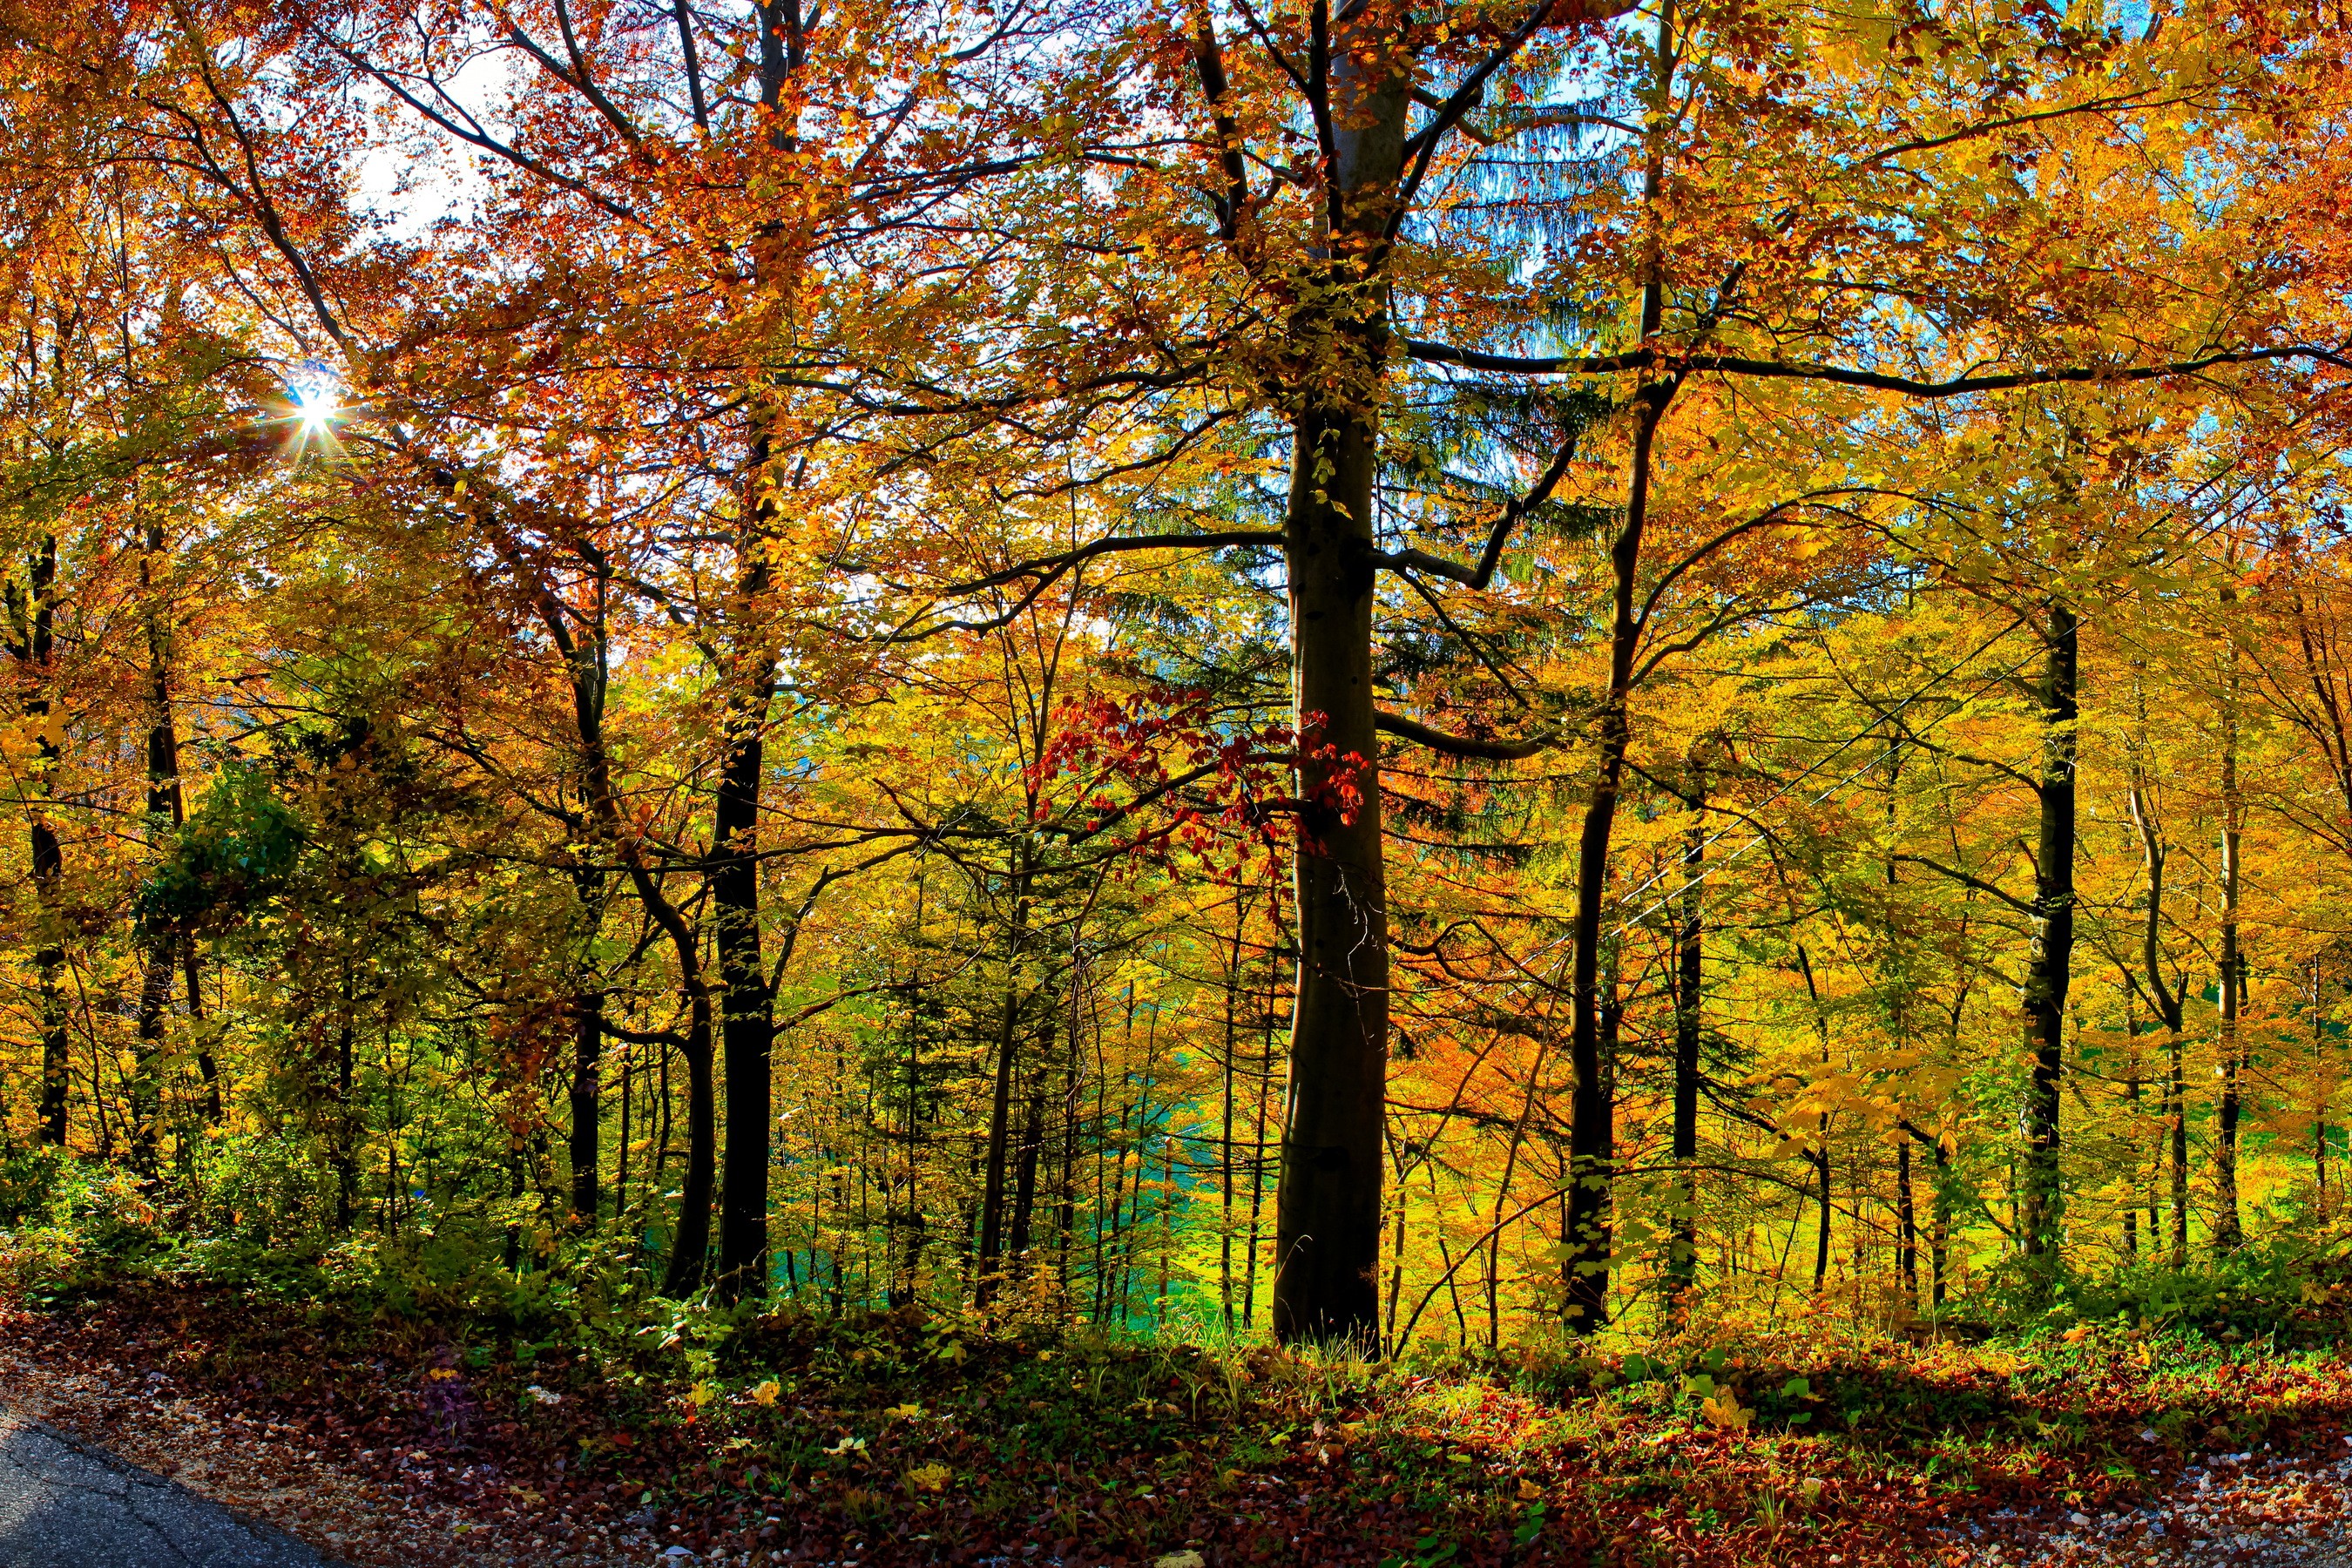 General 2700x1800 forest trees nature leaves sunlight fall